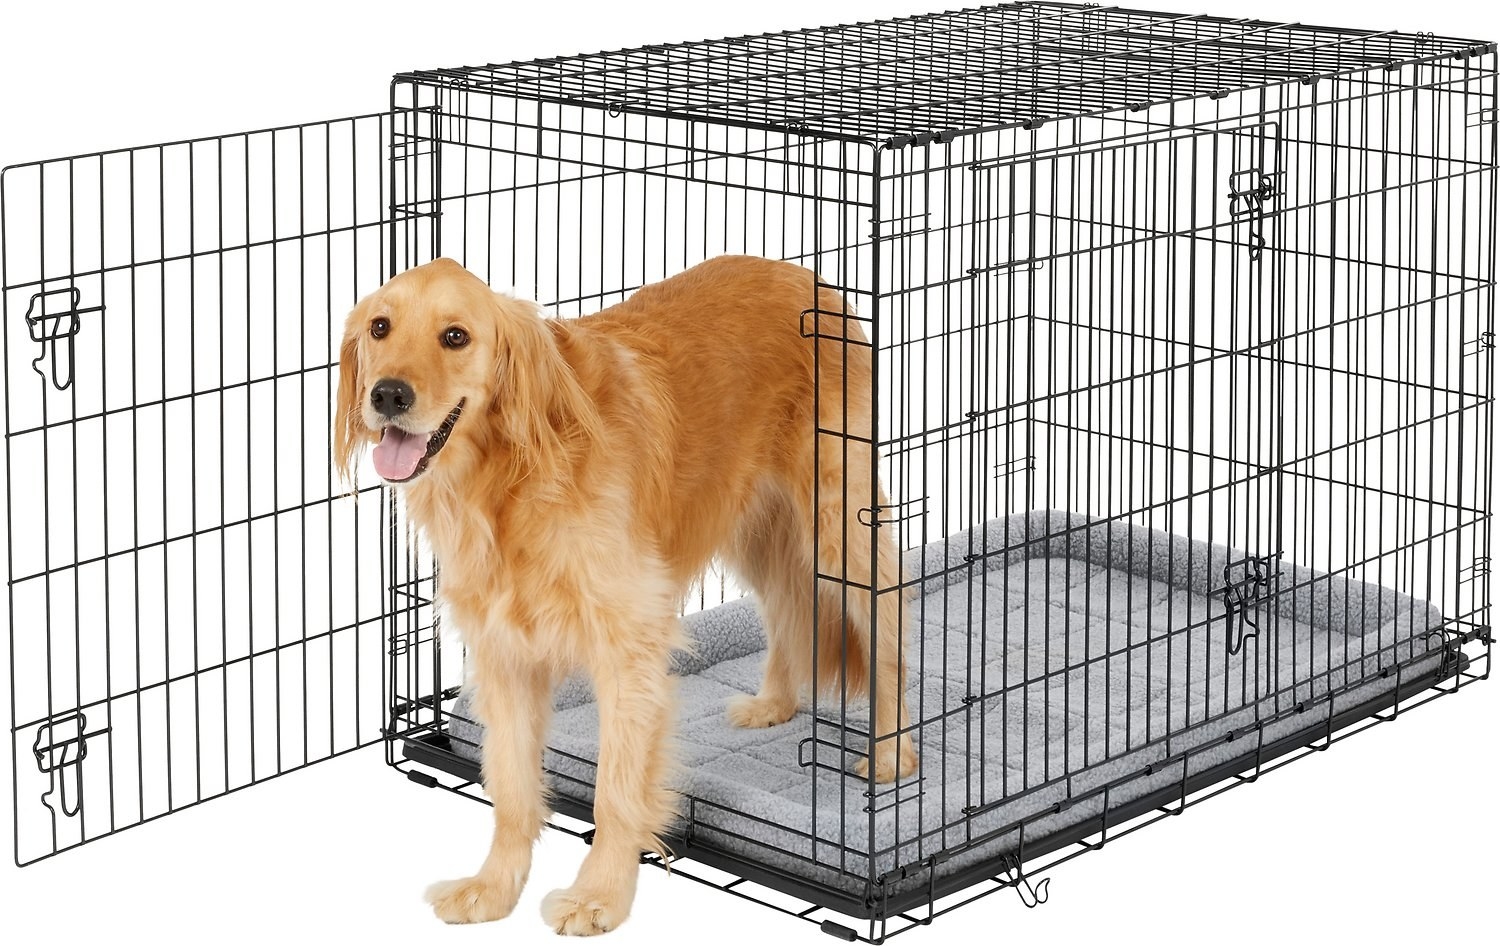 A Golden Retriever dog standing up in the metal dog crate.